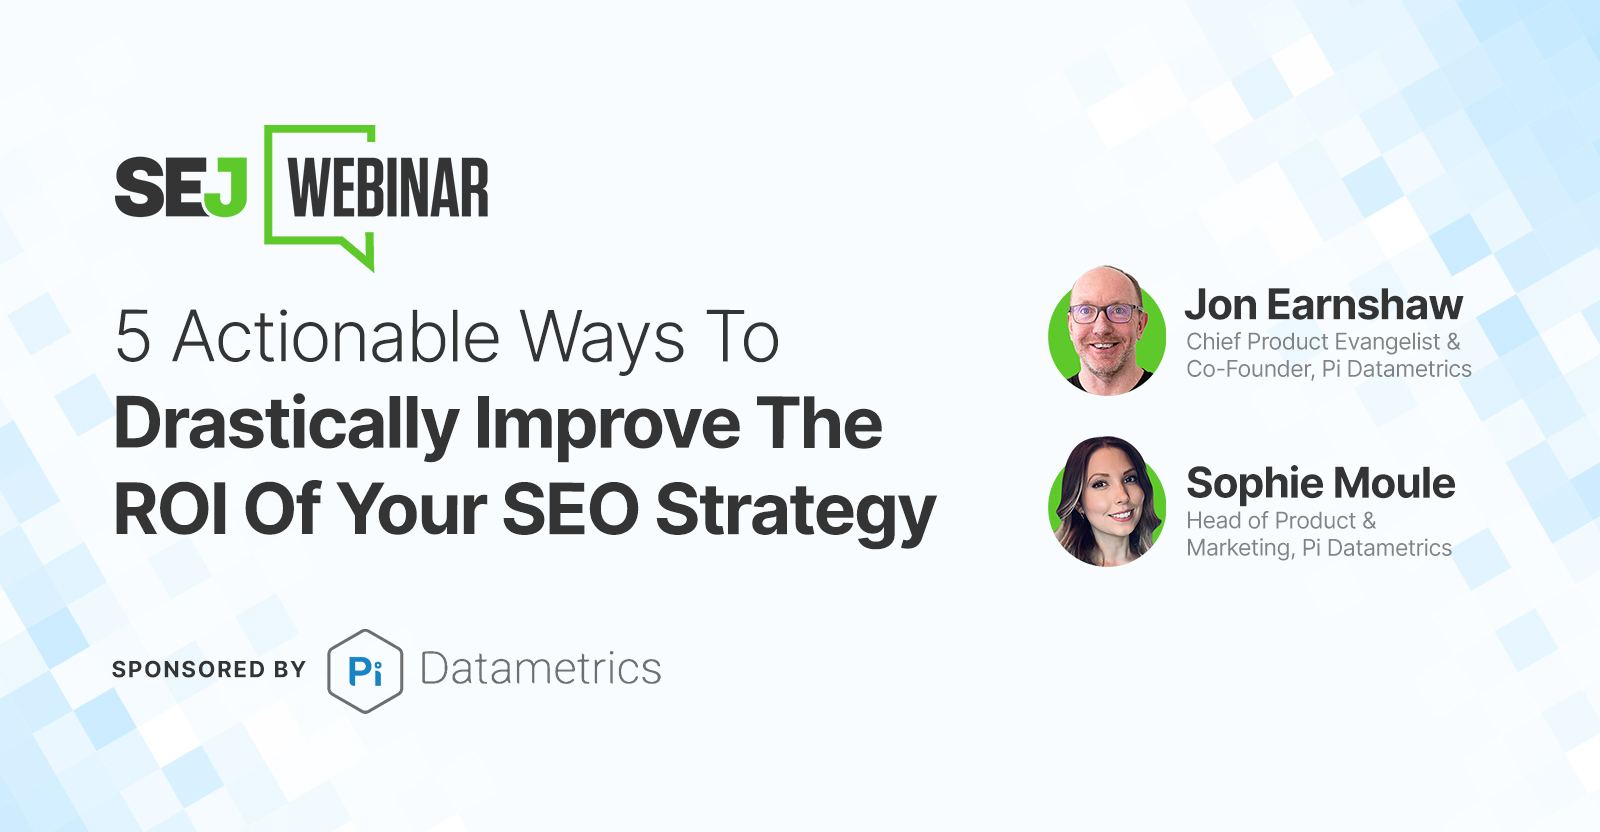 5 Actionable Ways To Improve The ROI Of Your SEO Strategy